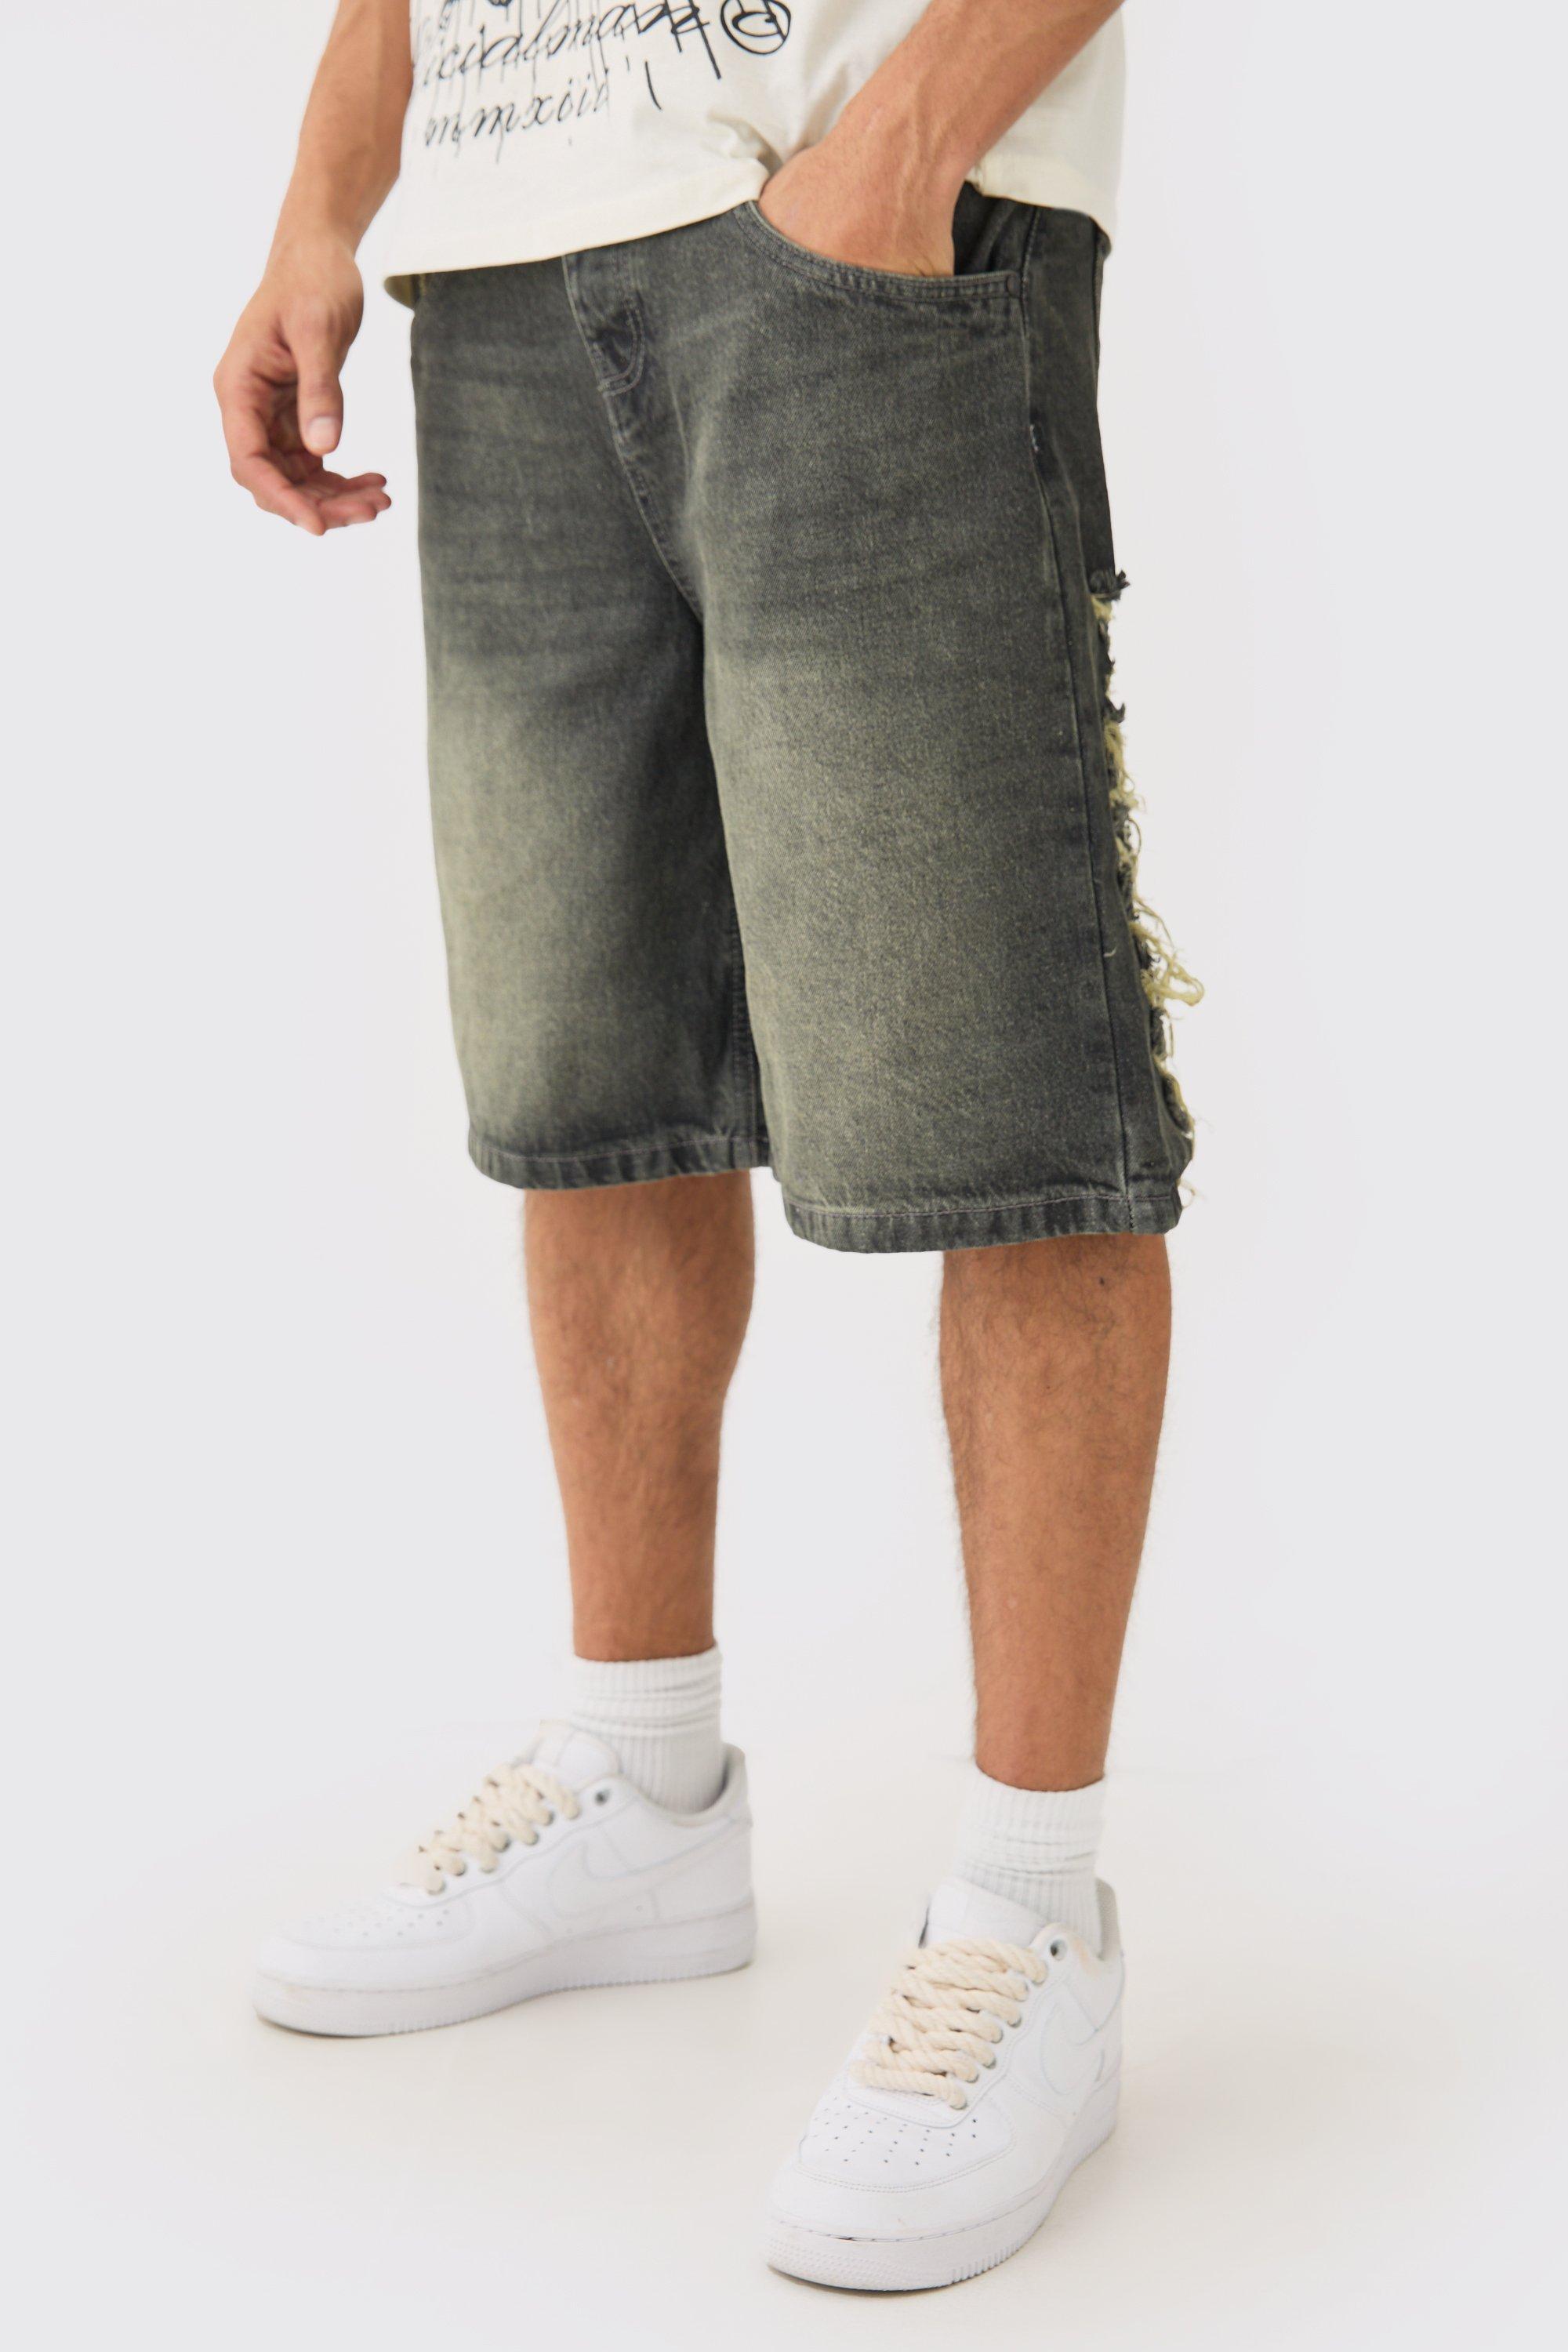 Mens Relaxed Rigid Extreme Ripped Denim Jorts In Antique Grey, Grey